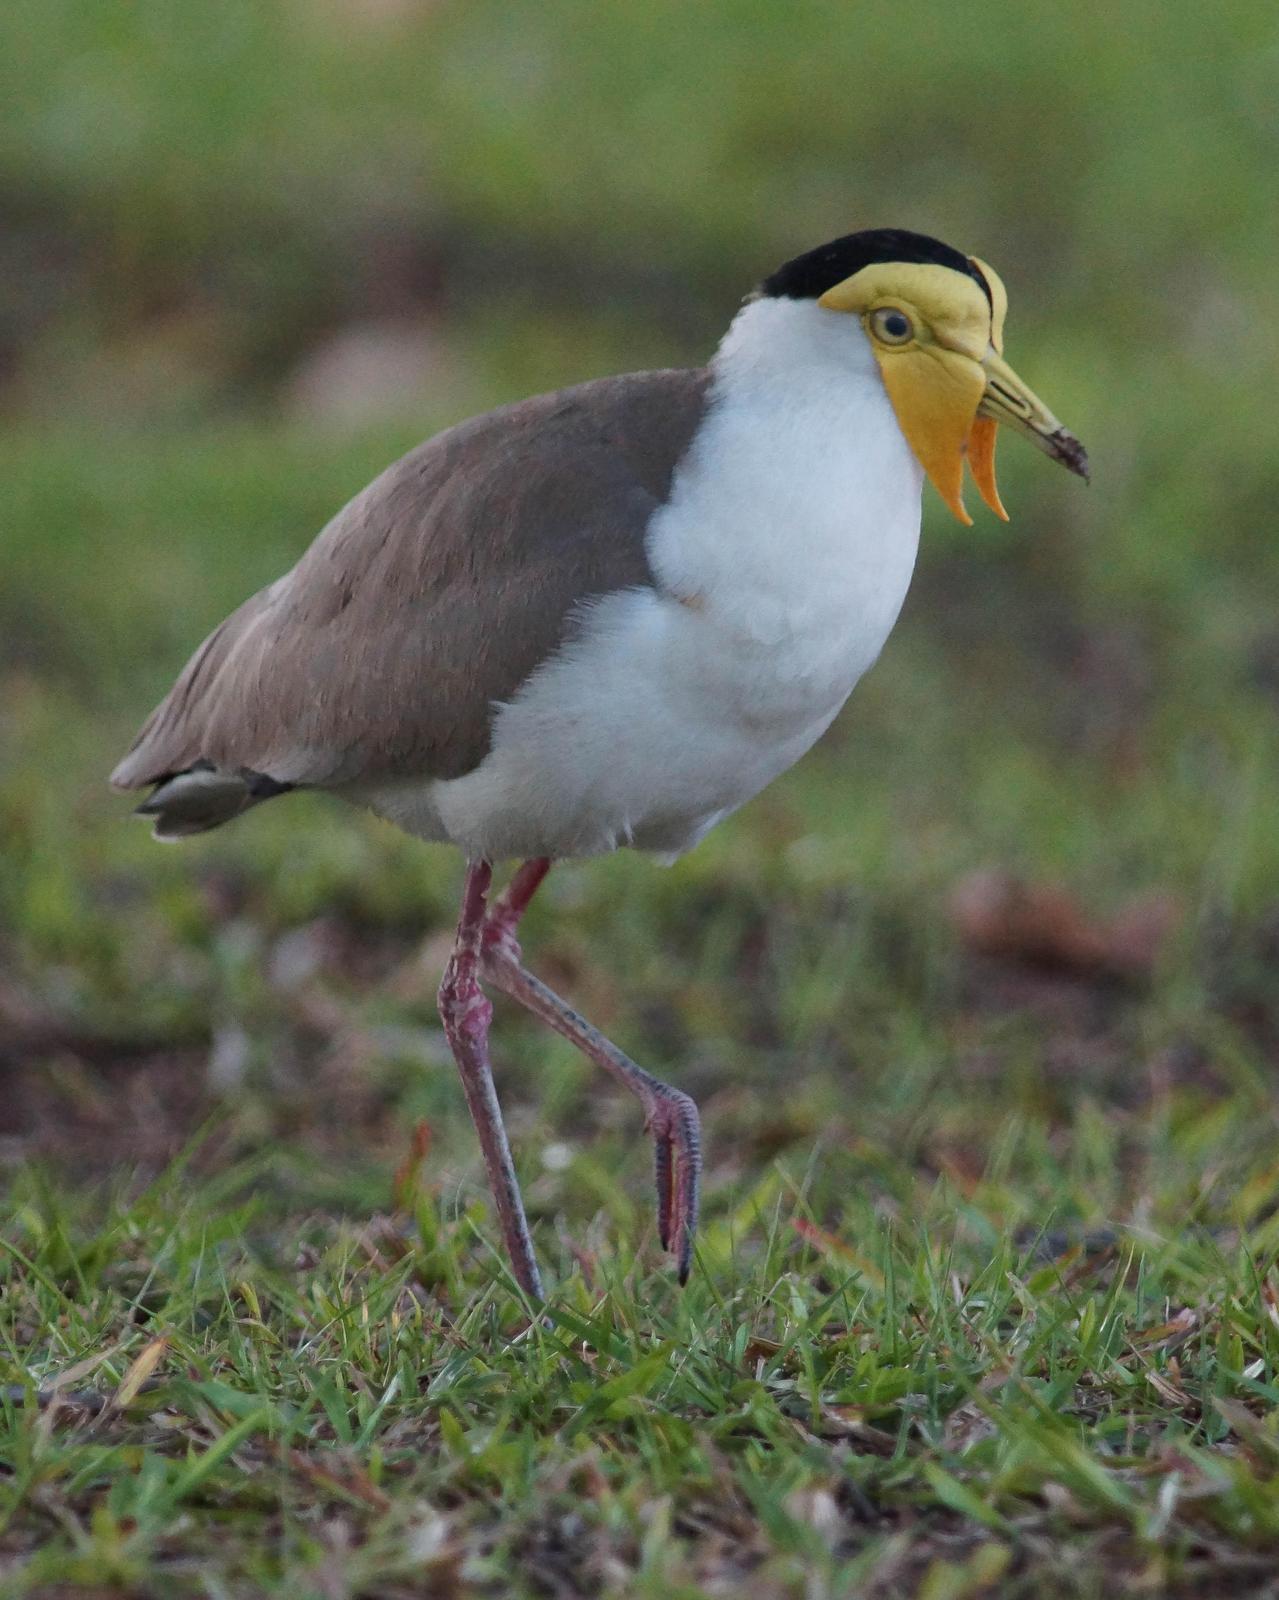 Masked Lapwing Photo by Steve Percival